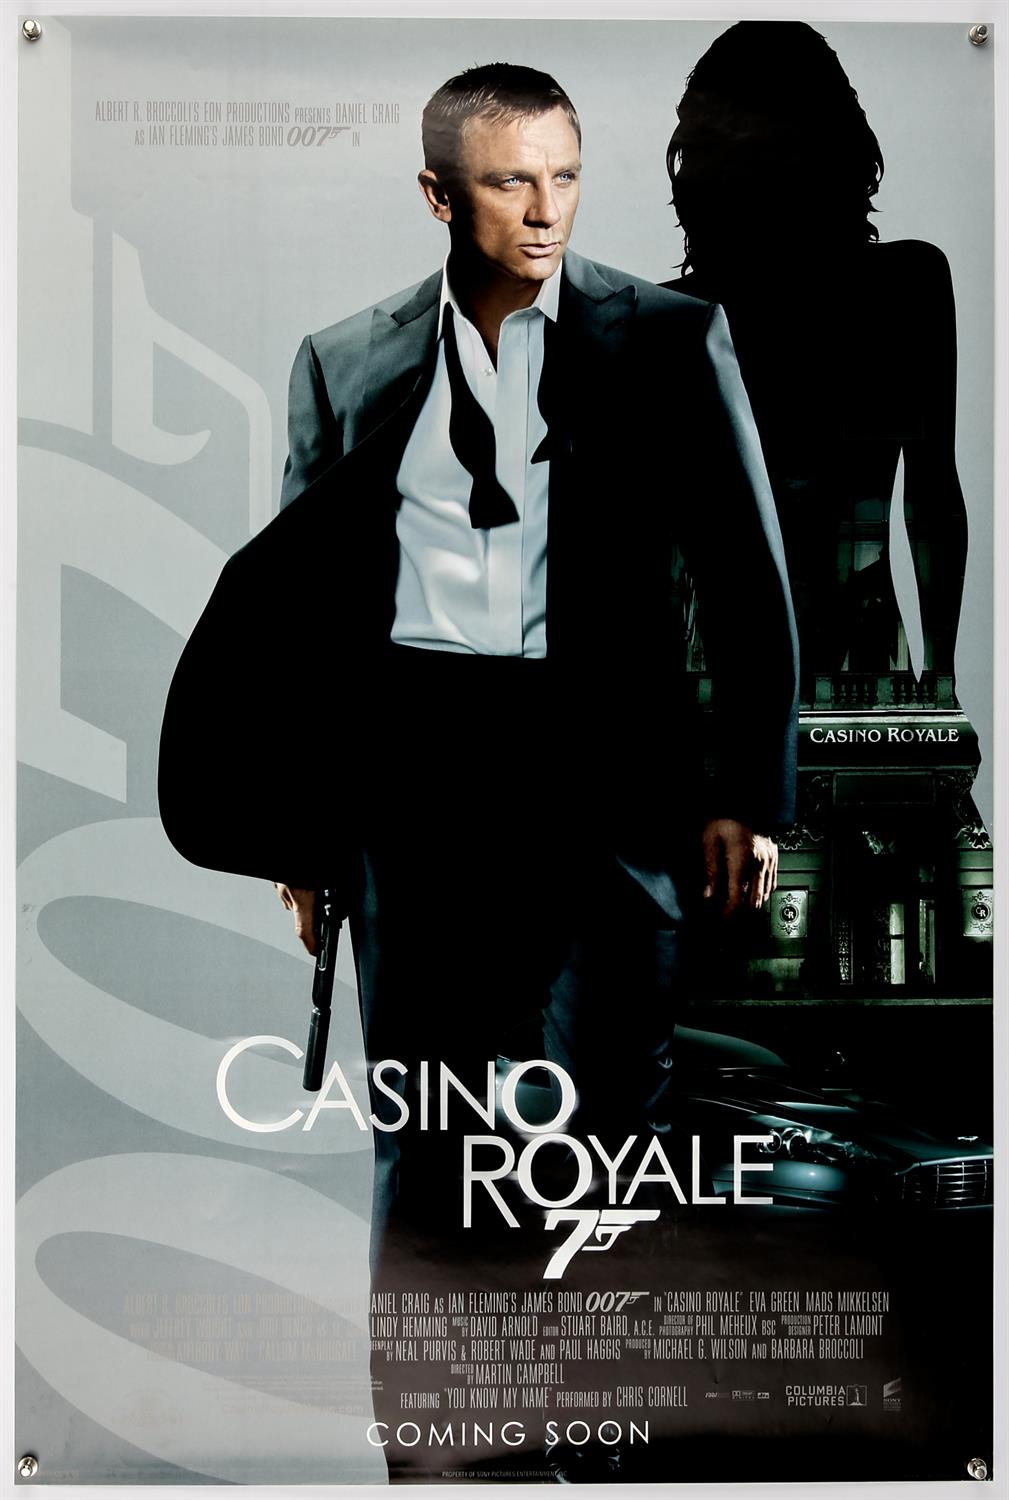 Commercial film poster collection, 14+ posters, titles include: Casino Royale x 2; Pyramid One